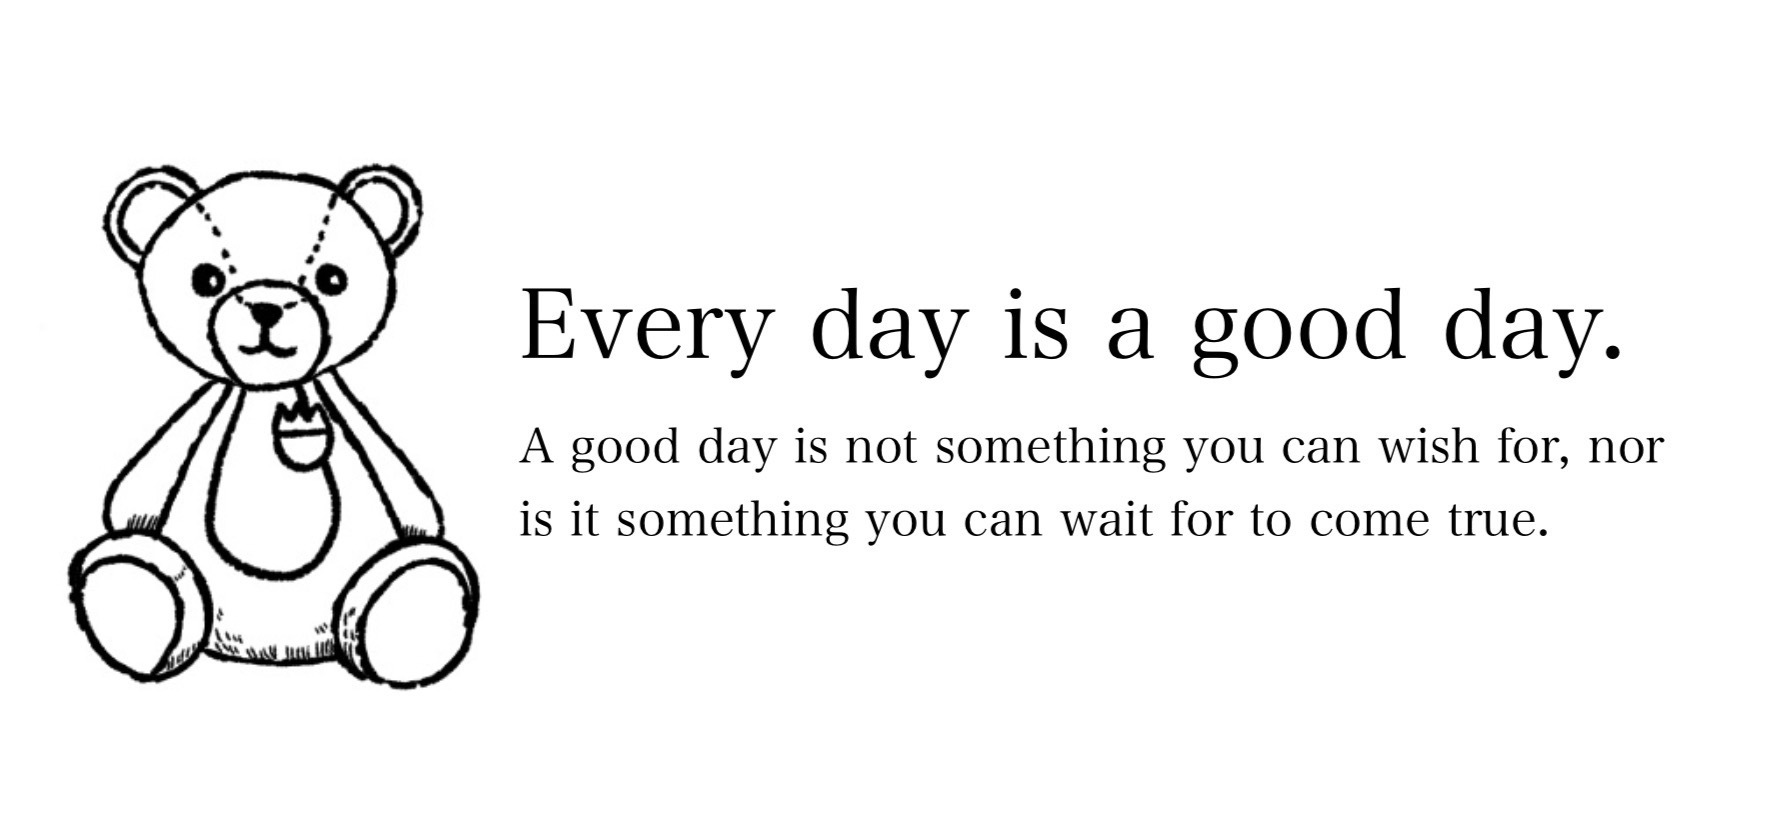 Every day is a good day.